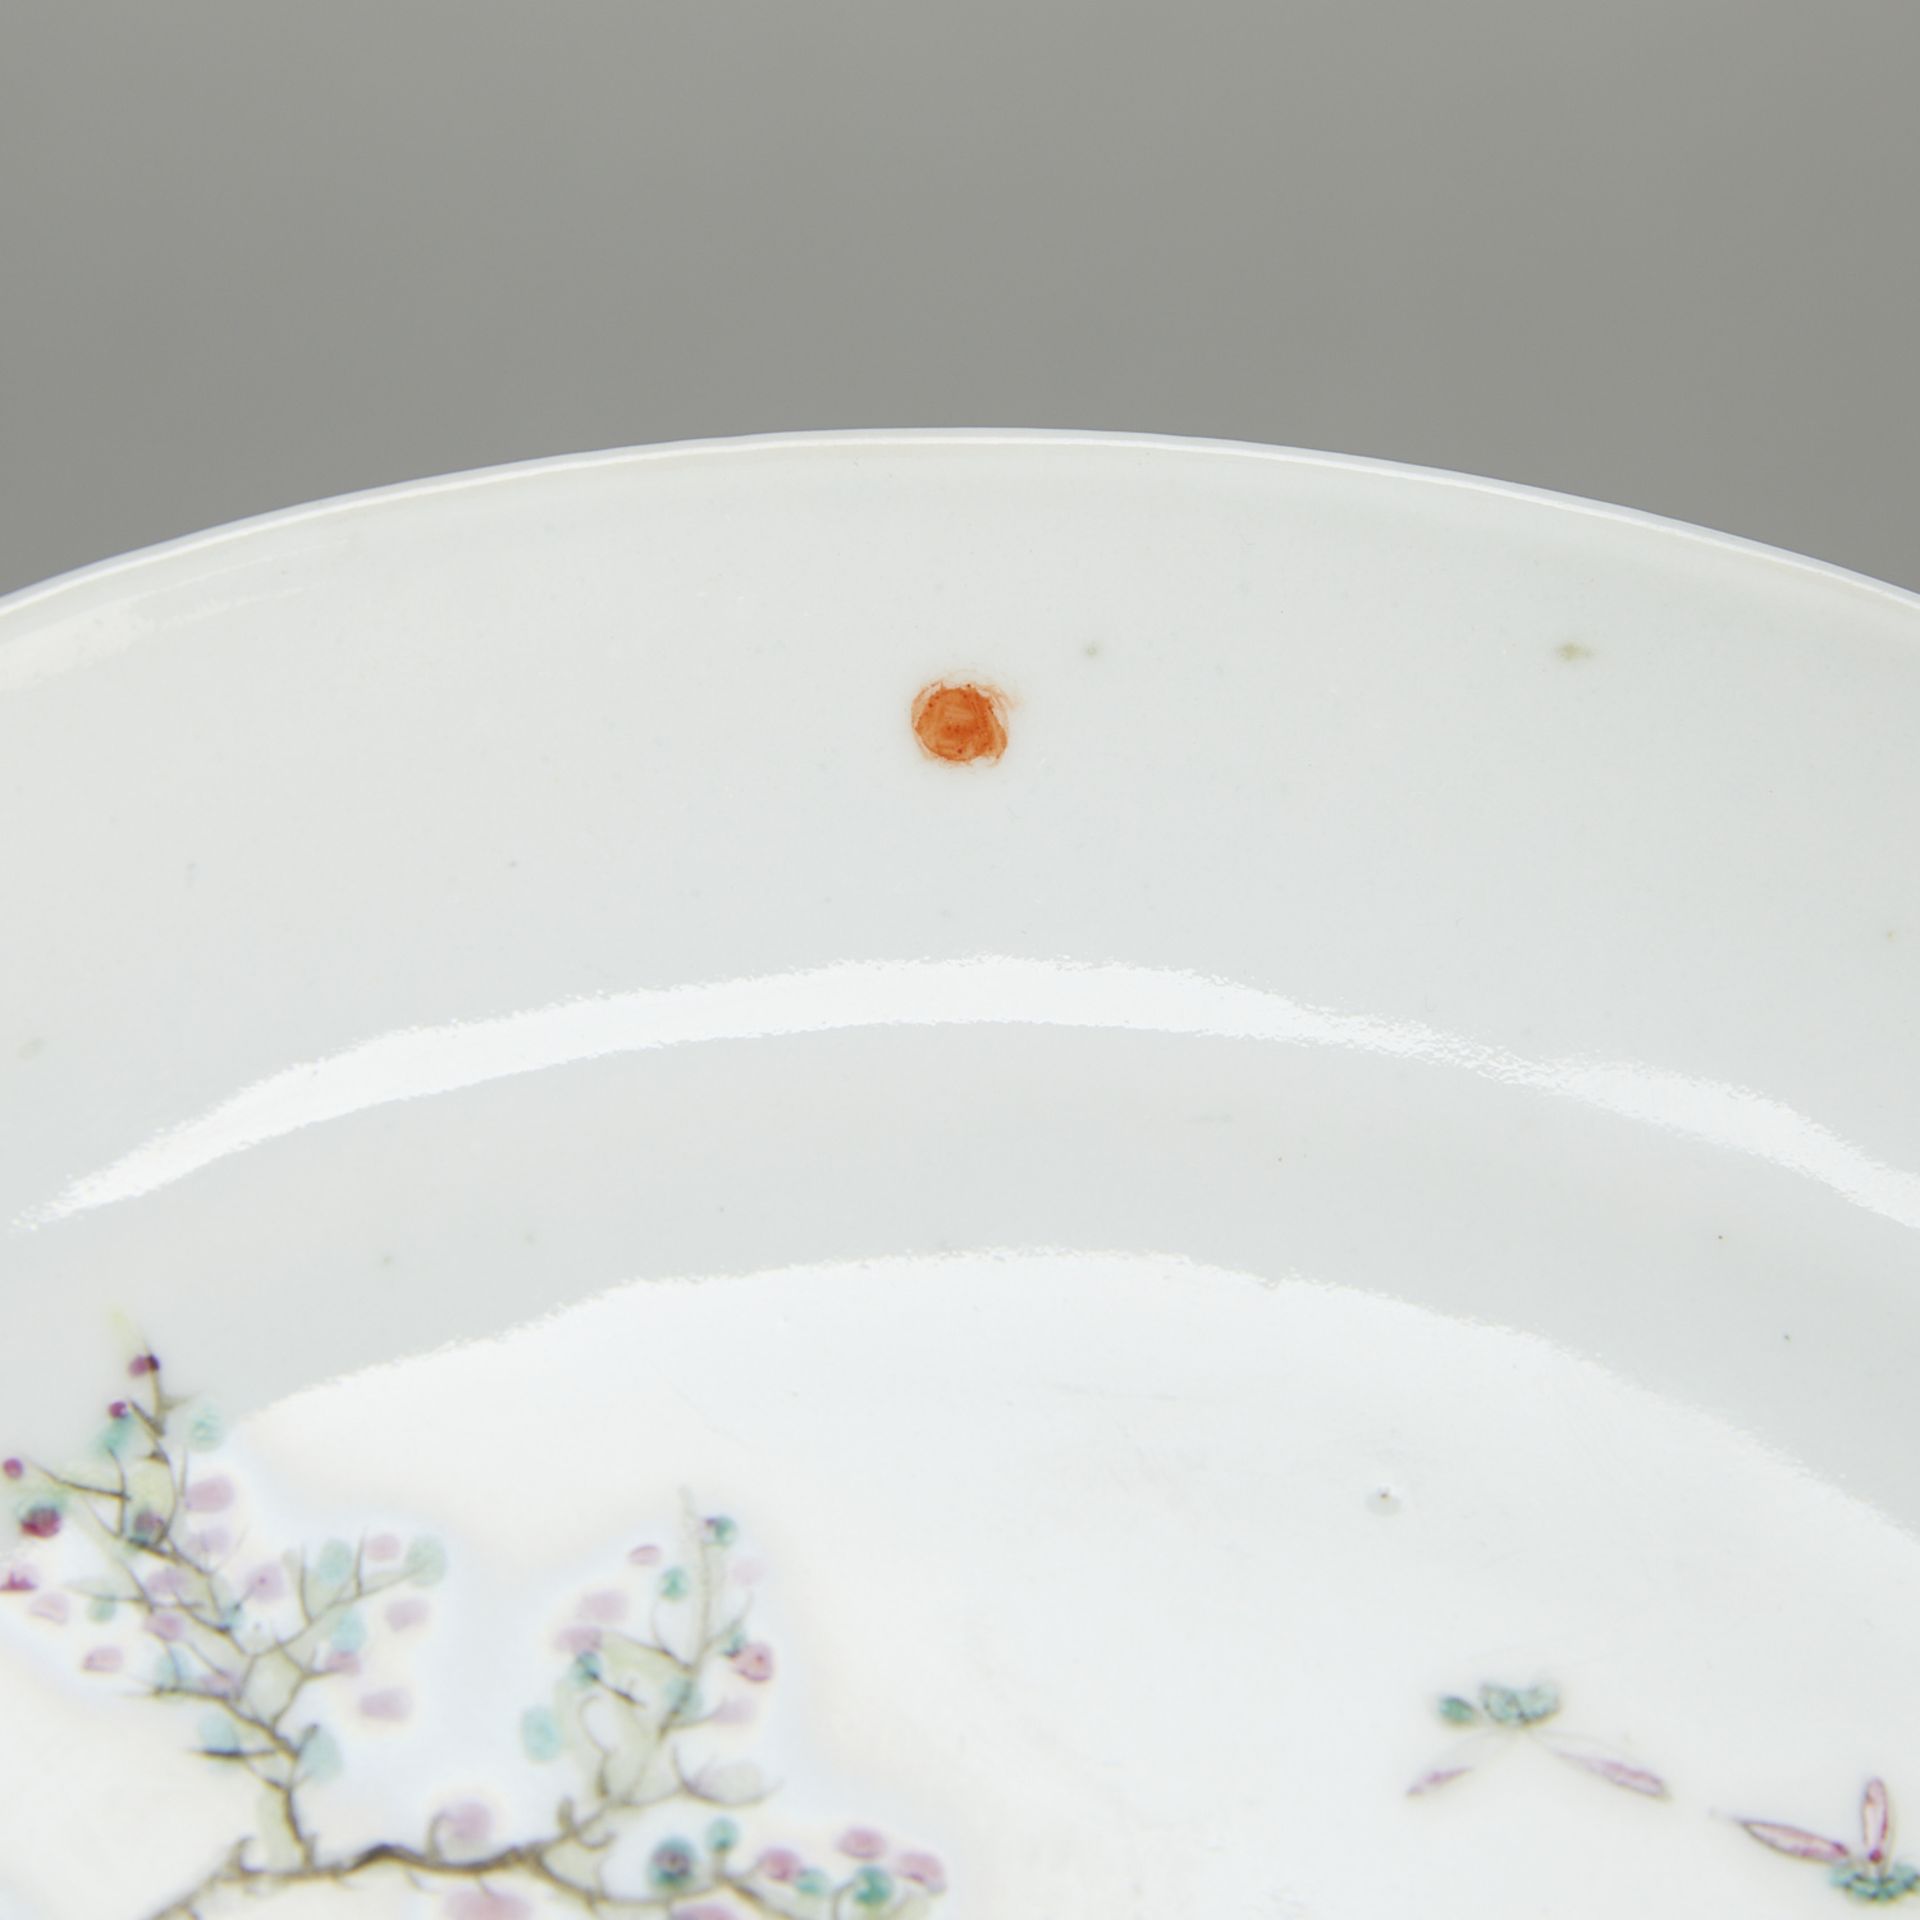 Chinese 19th/20th c. Famille Rose Porcelain Plate - Image 6 of 6